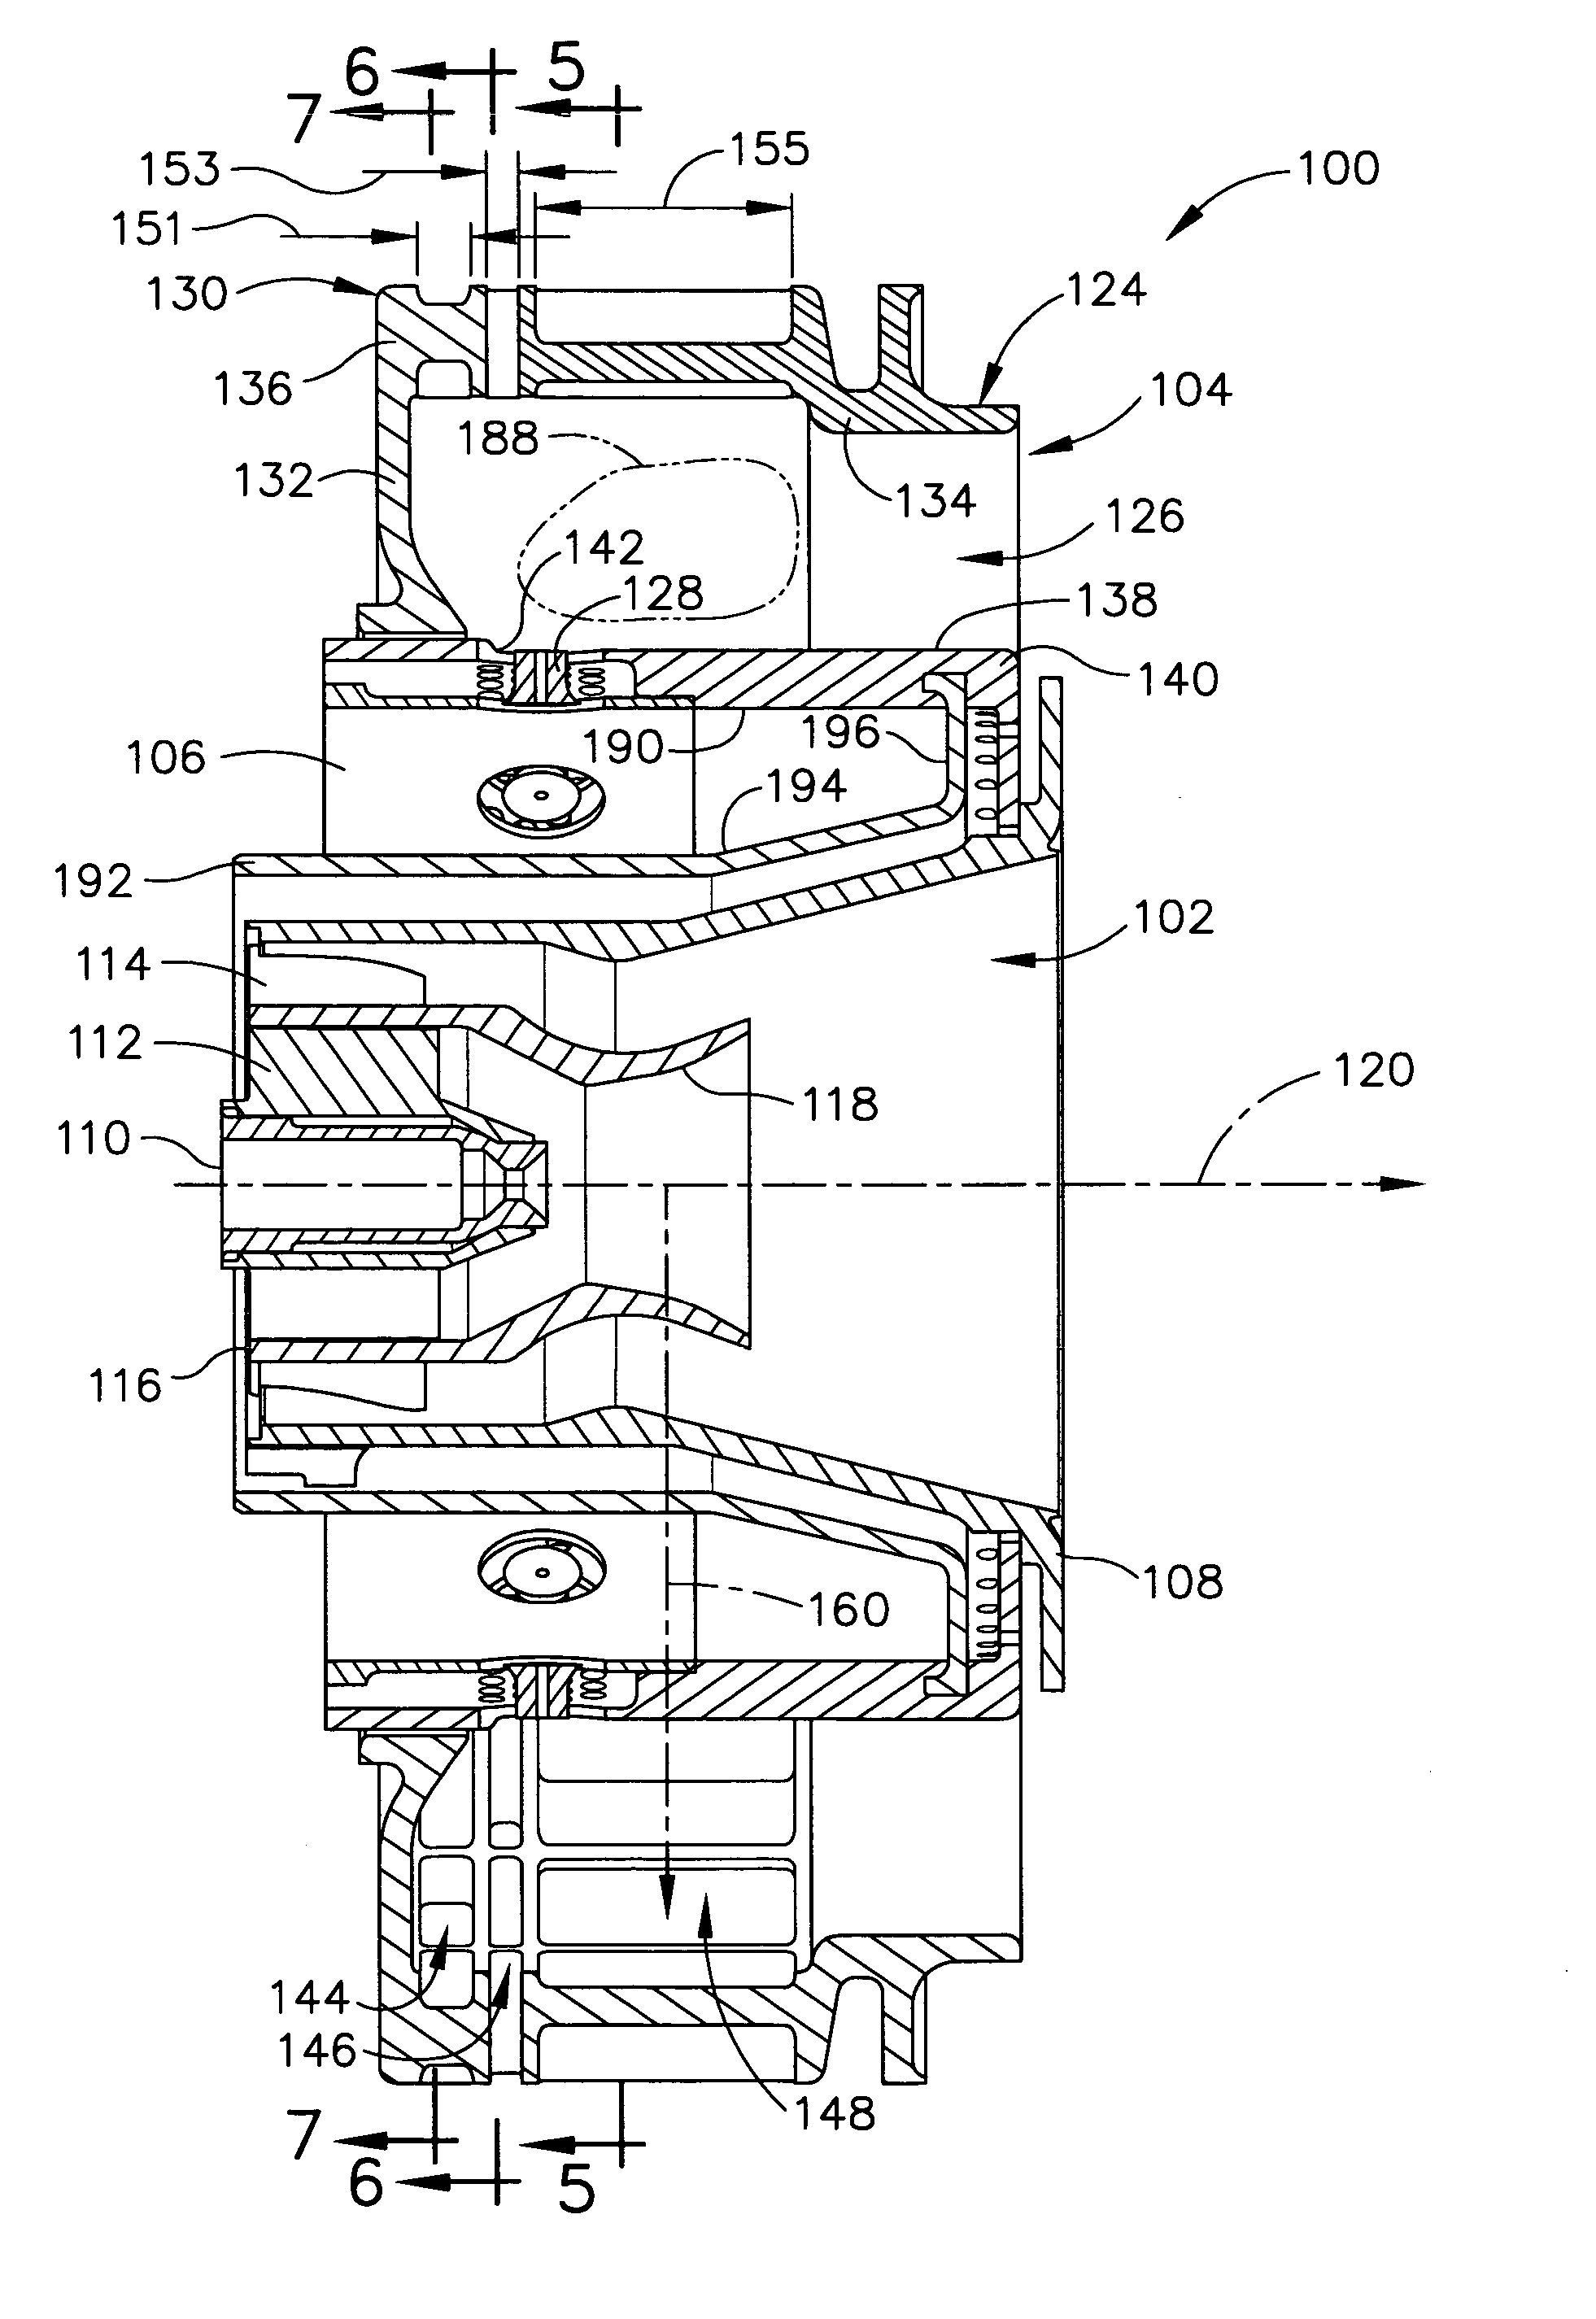 Mixer assembly for combustor of a gas turbine engine having a plurality of counter-rotating swirlers